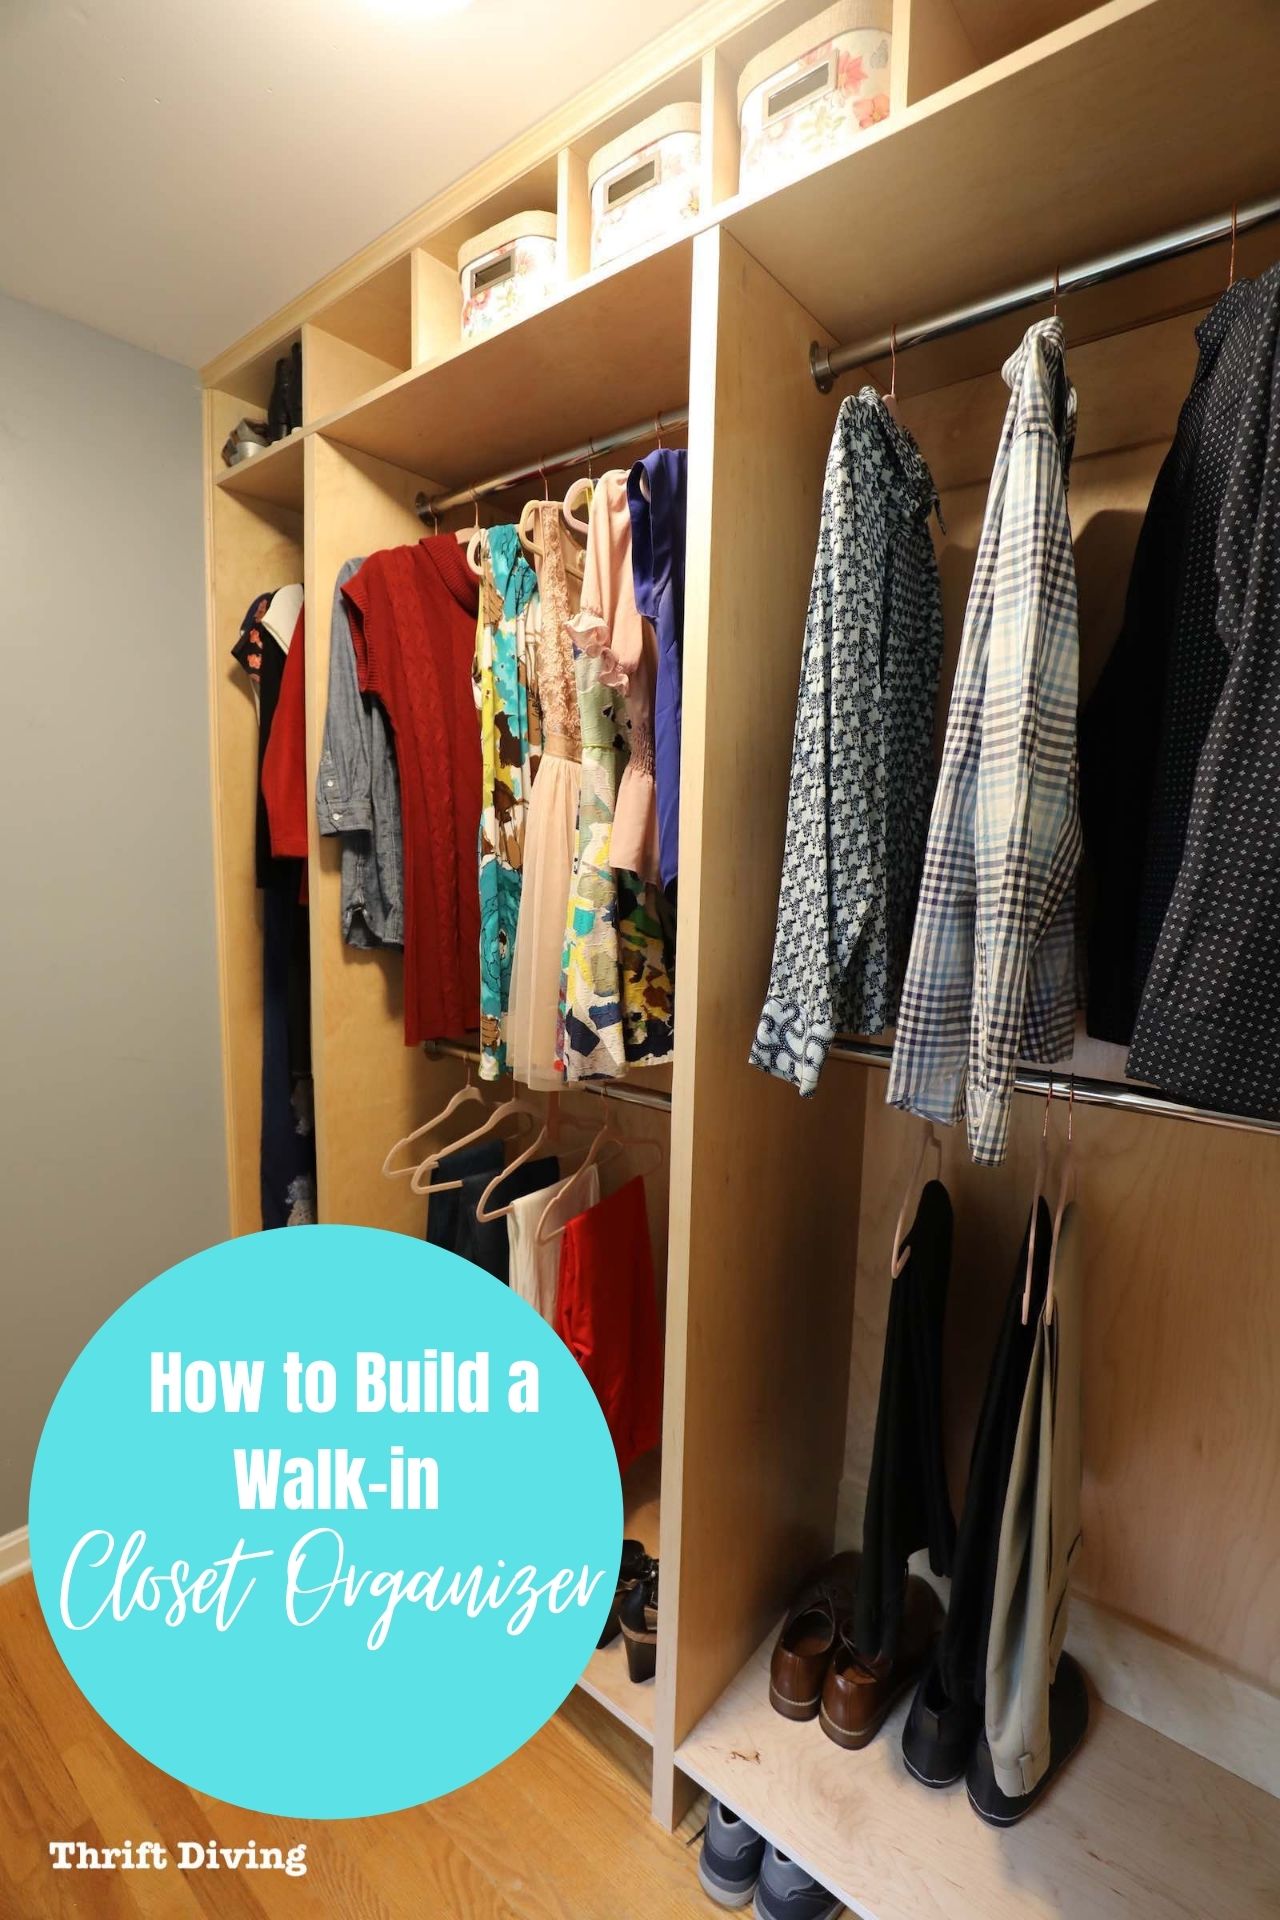 How To Build A Walk In Closet Organizer, How To Add Shelves A Closet Without Drilling